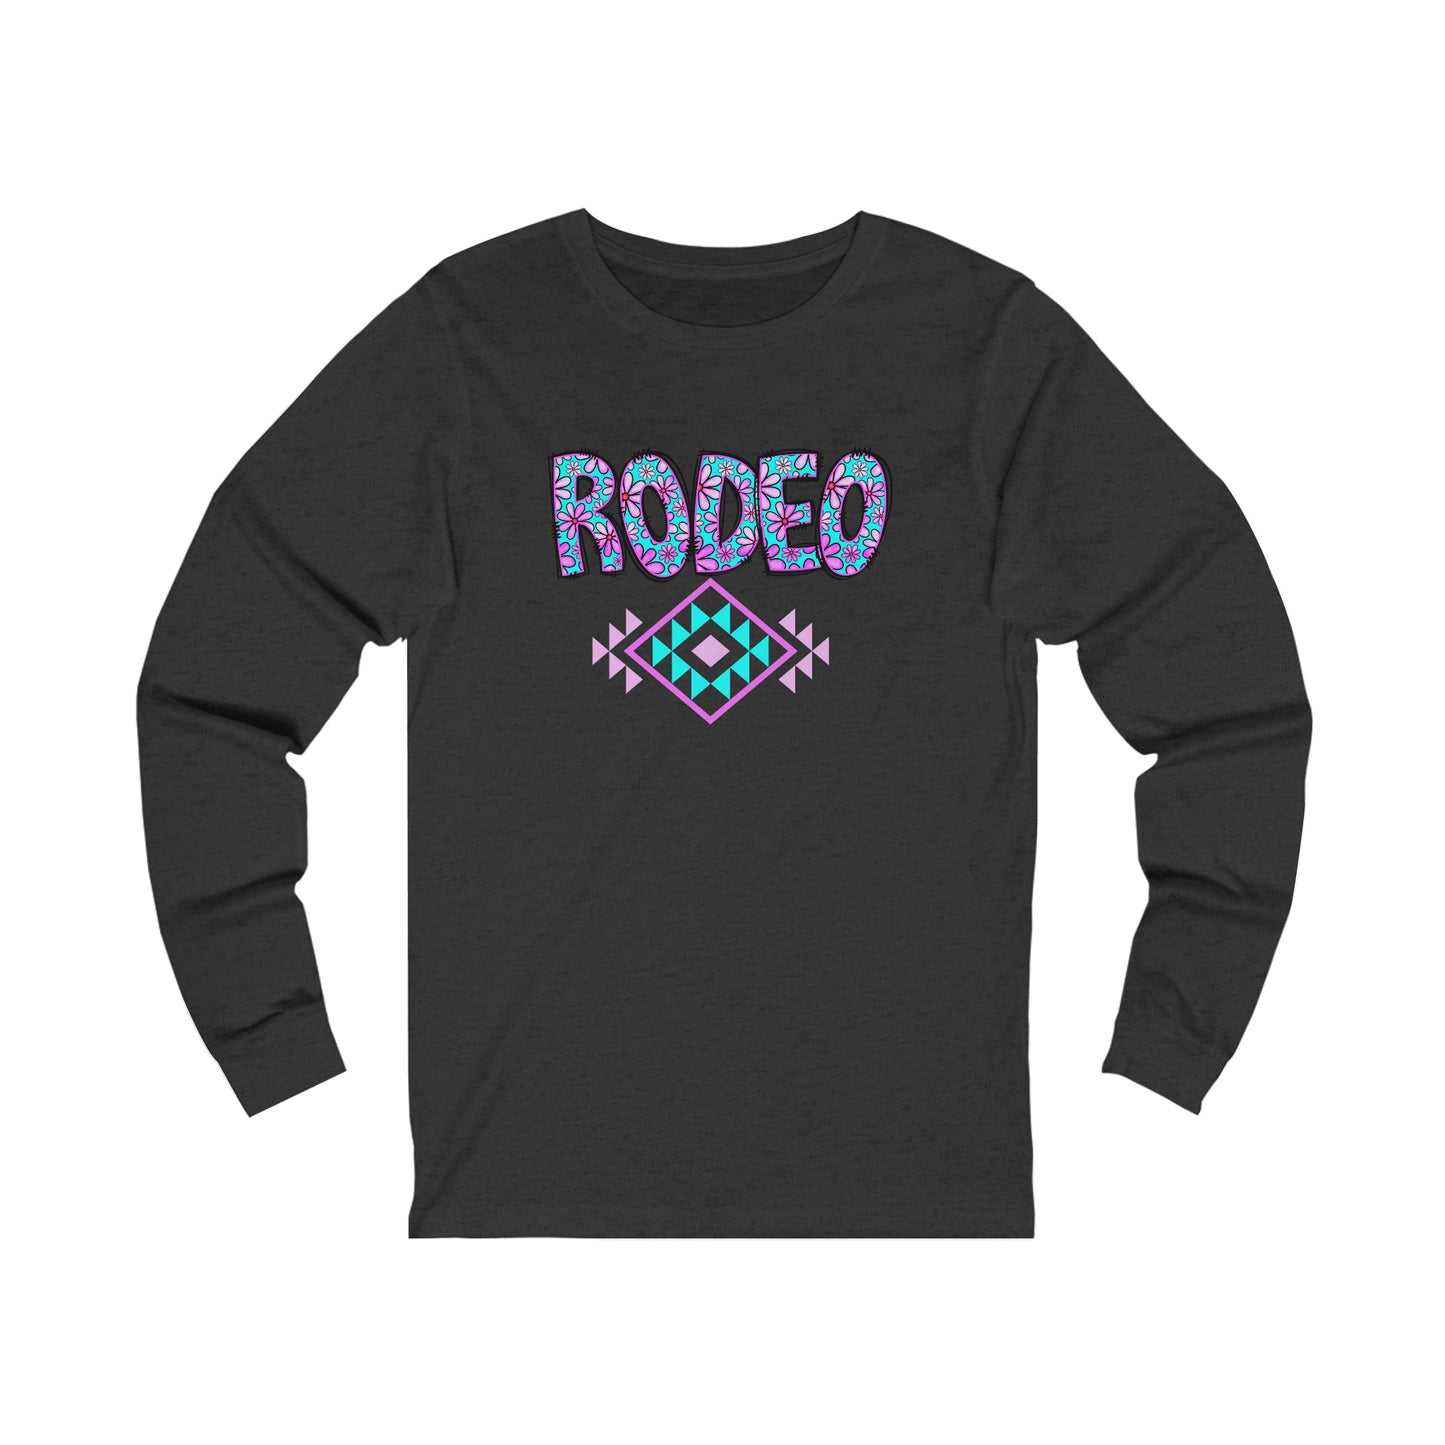 Rodeo t-shirt With Flower Letters, Rodeo Shirt, Colorful Western T-Shirt, Rodeo T-Shirt, Western Shirt, Gifts For Her, Womens Rodeo Shirt